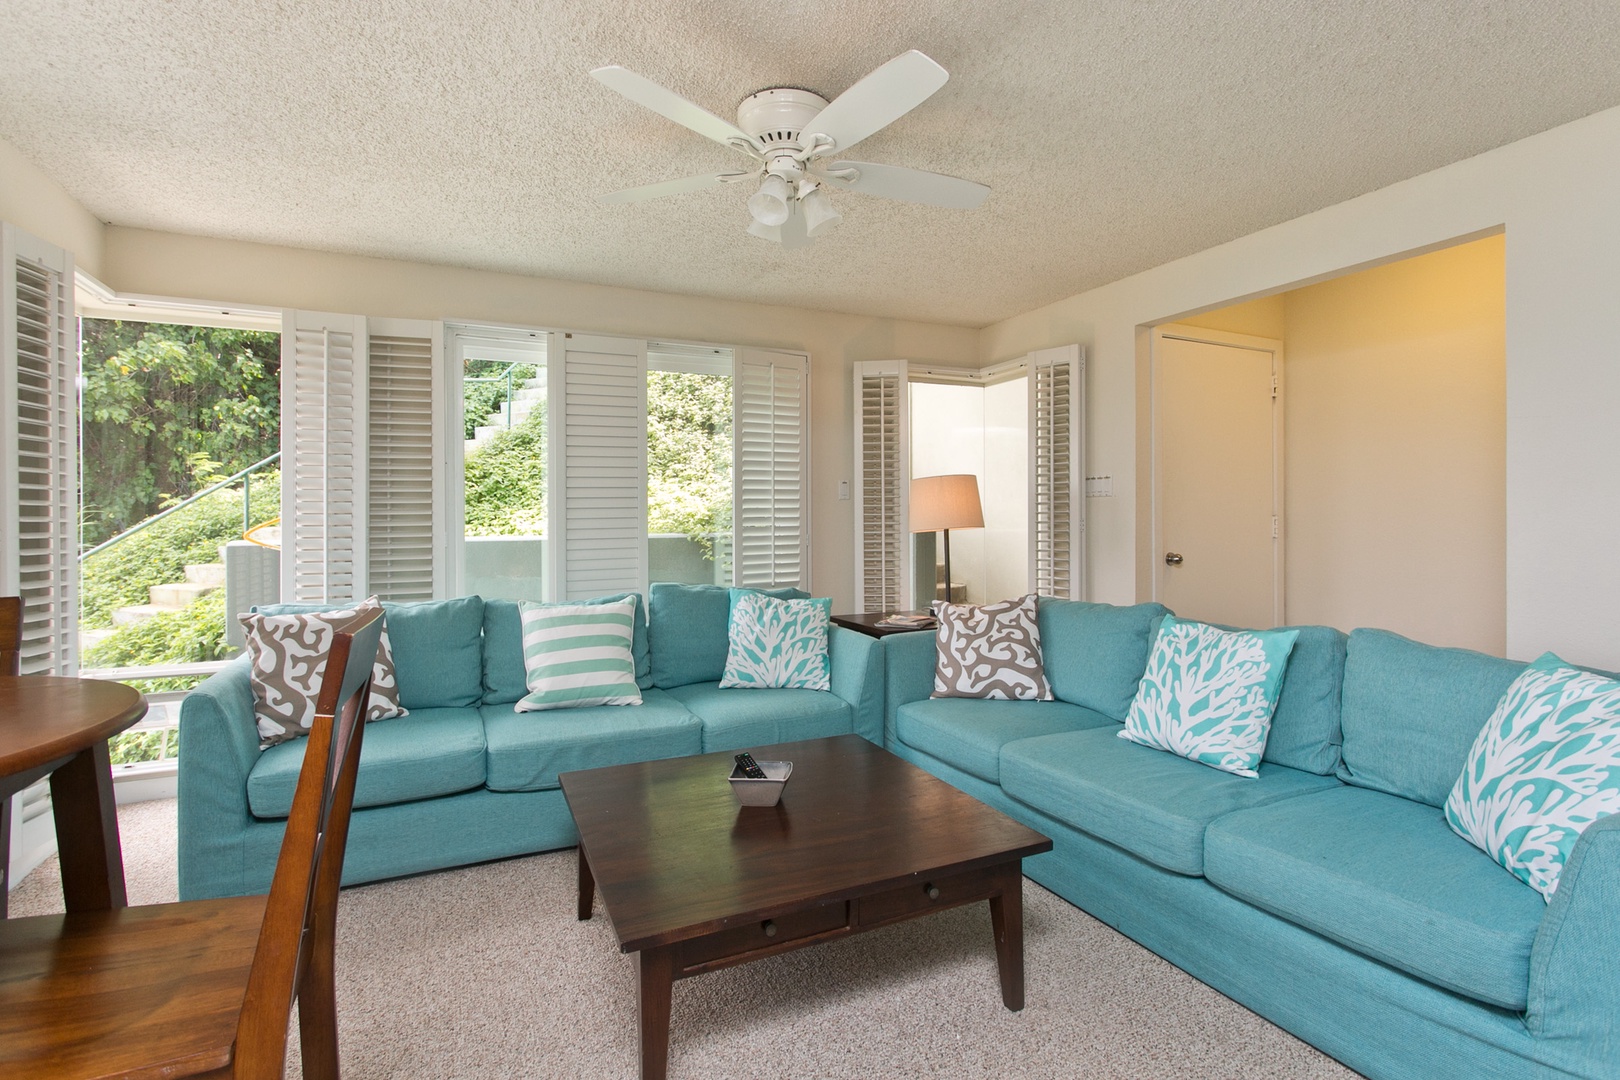 Kailua Vacation Rentals, Hale Kolea* - Primary lounge area with sectional sofas.